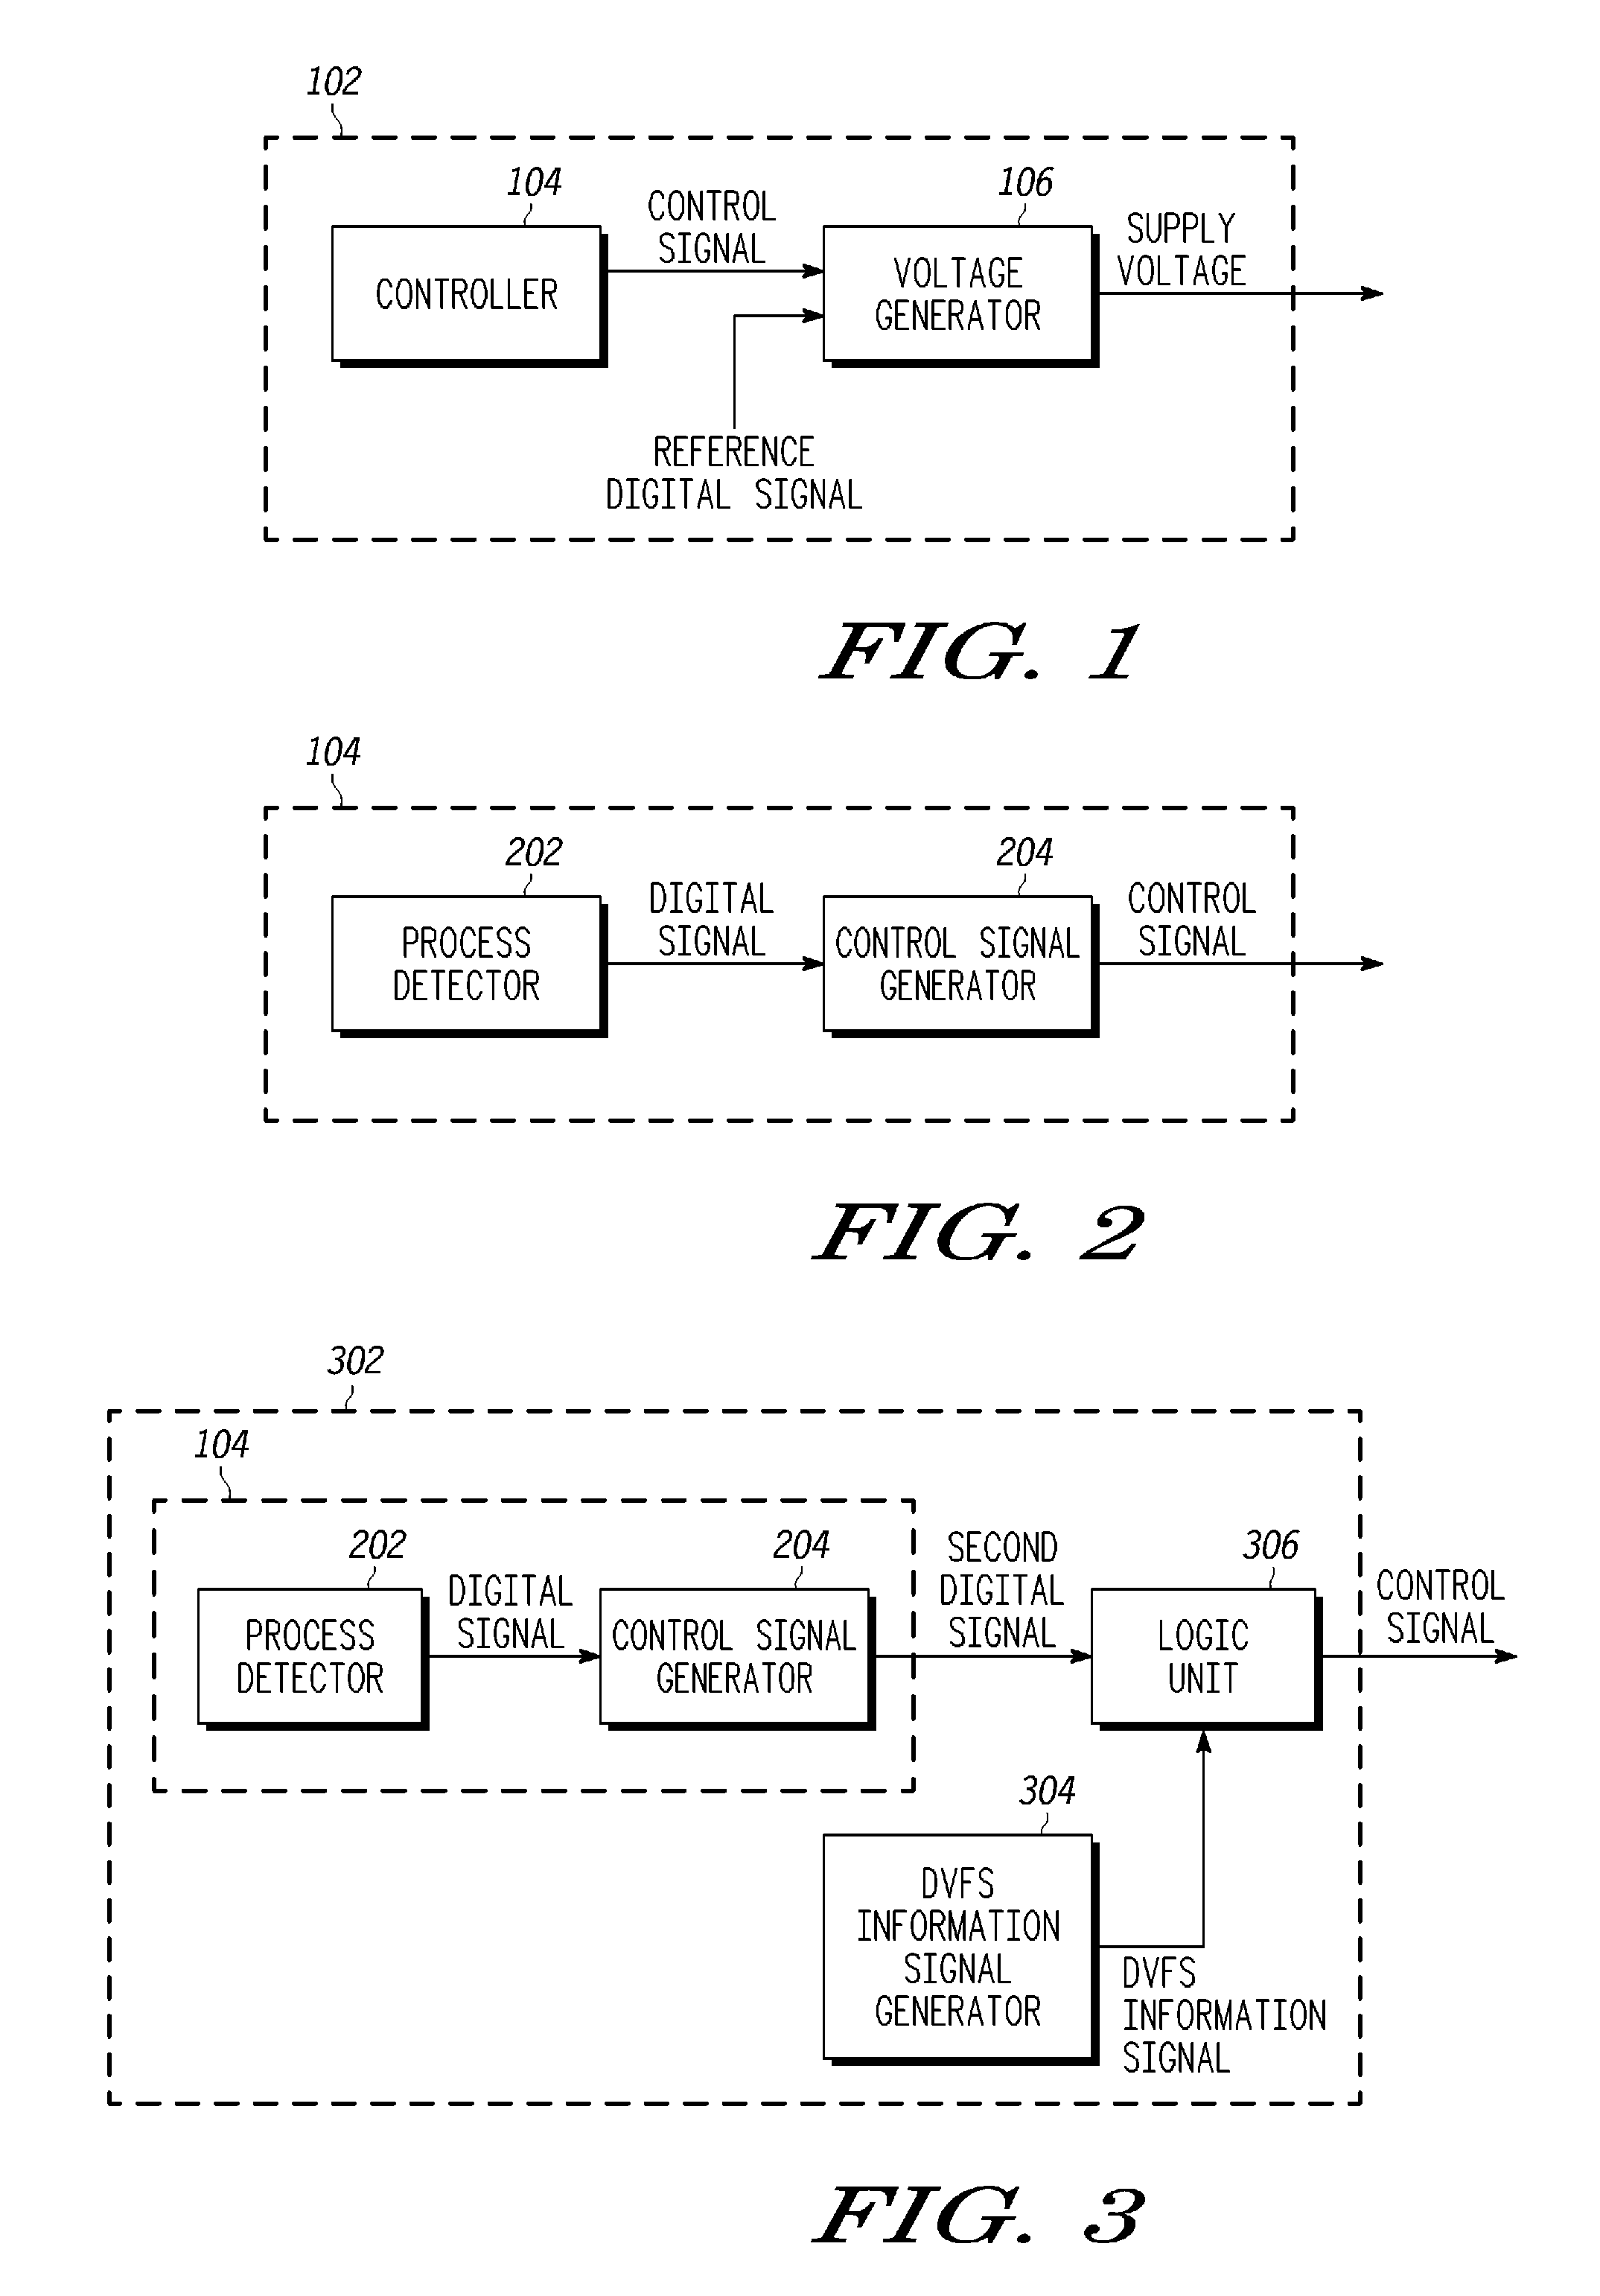 Power management in integrated circuits using process detection